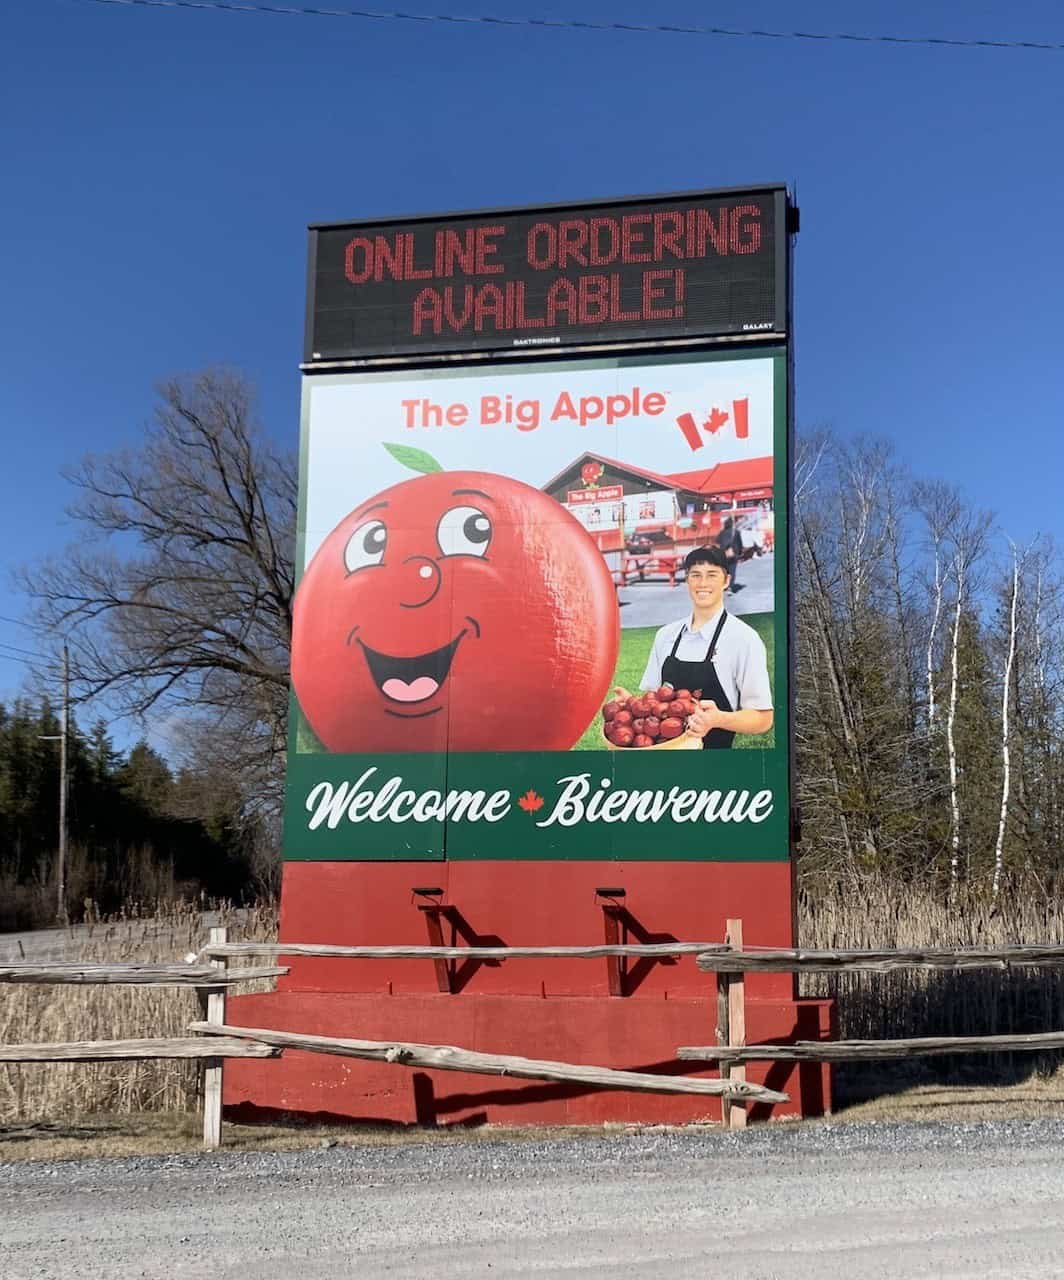 The Big Apple Road Sign Colborne Ontario - This Big Apple roadside sign welcomes and directs visitors to the Big Apple site in Colborne, Ontario Canada.